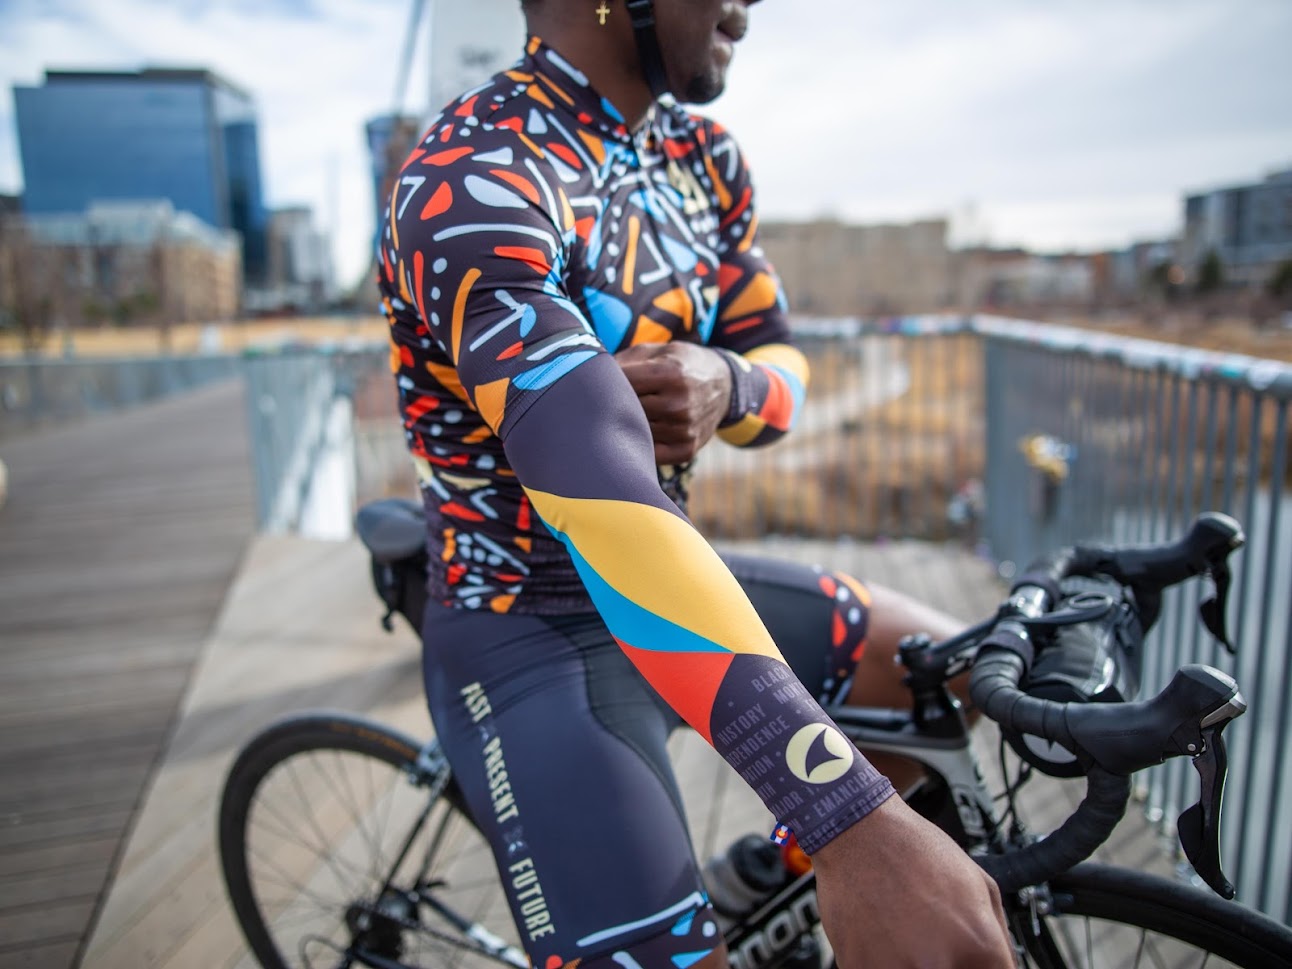 Summer Sleeves - adelaidebifolddoors x Major Taylor Iron Riders - A cycling clothing celebration of Black History Month - Past, Present, Future